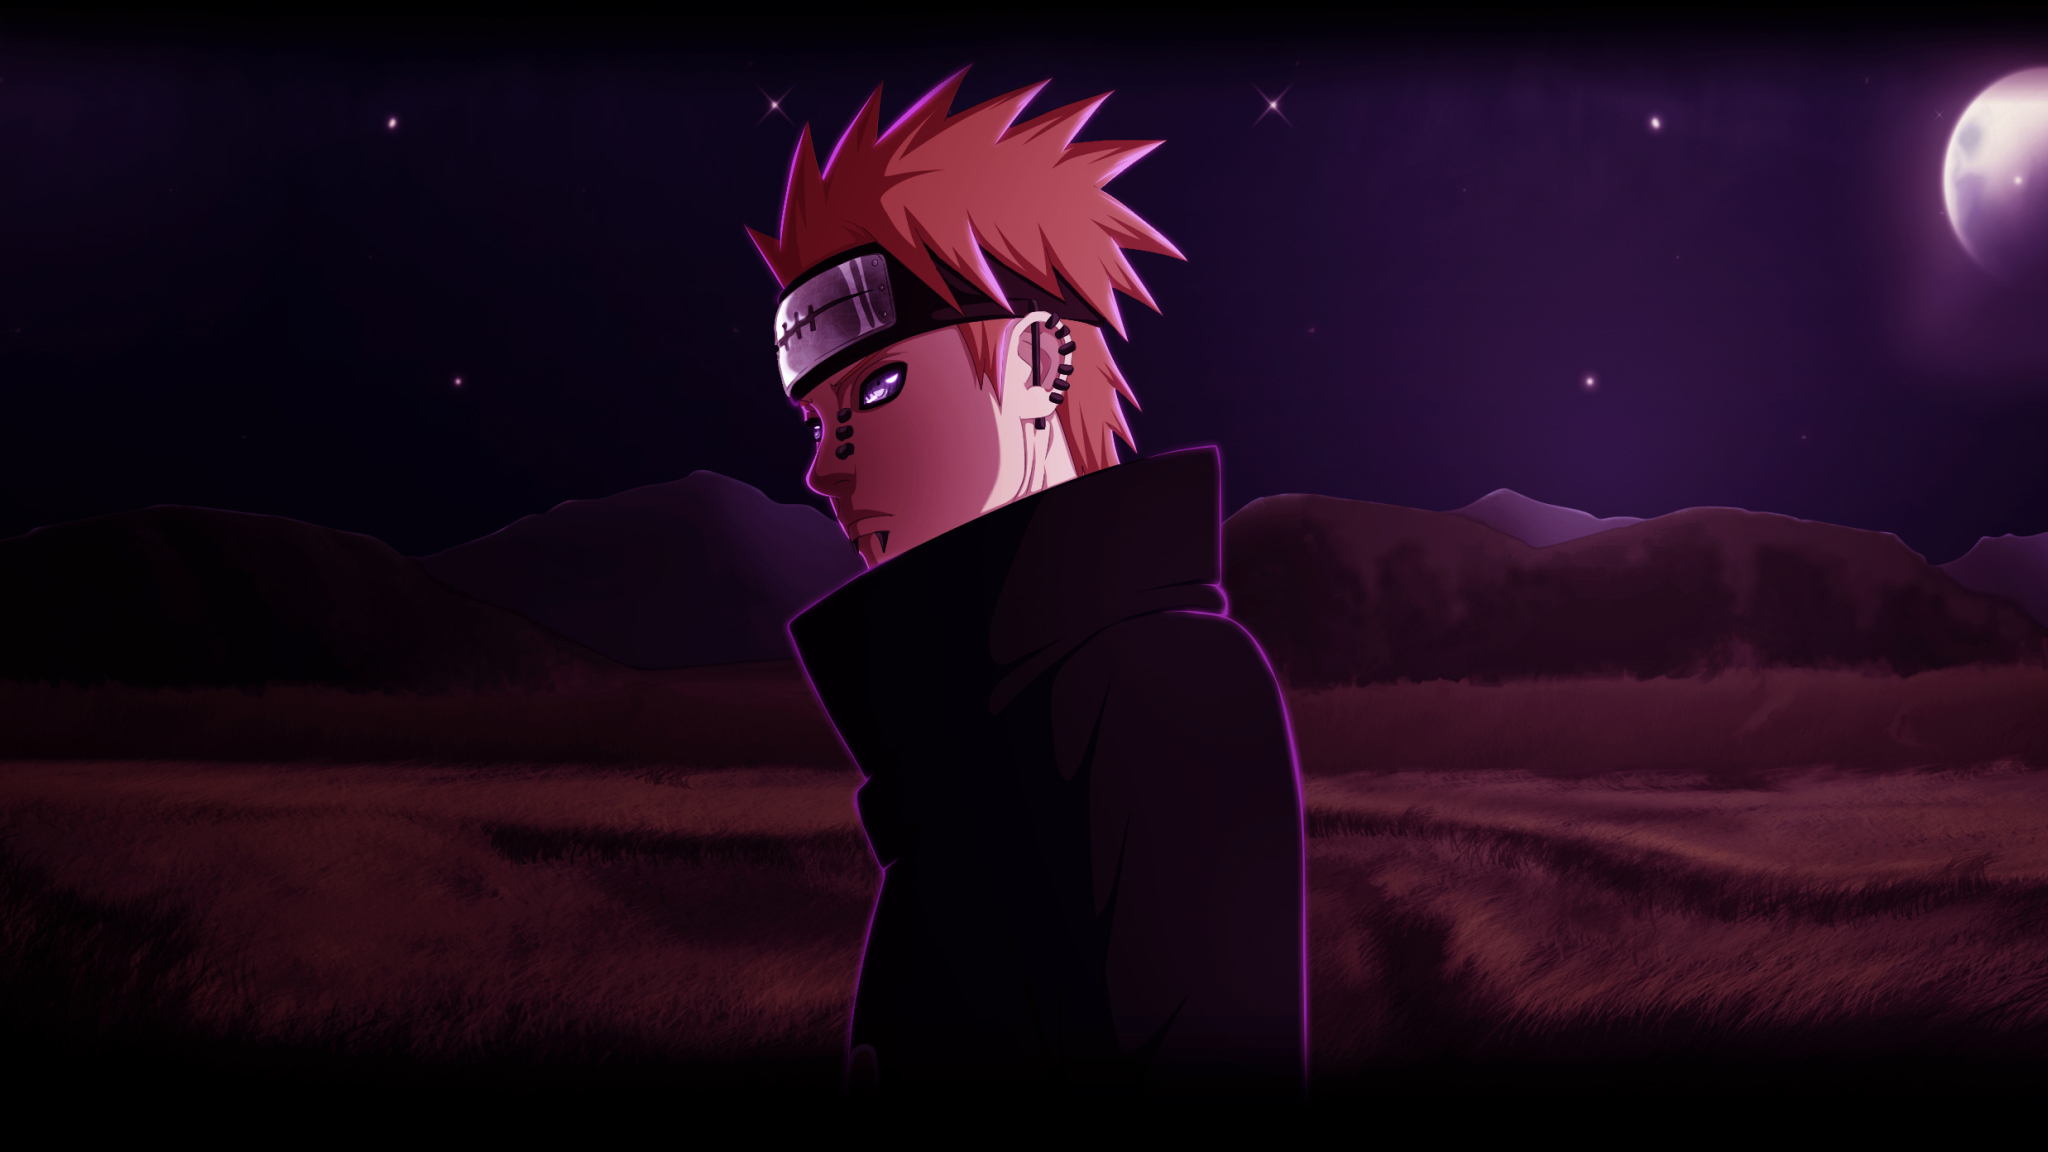 48x1152 Pain Yahiko Naruto 48x1152 Resolution Wallpaper Hd Anime 4k Wallpapers Images Photos And Background